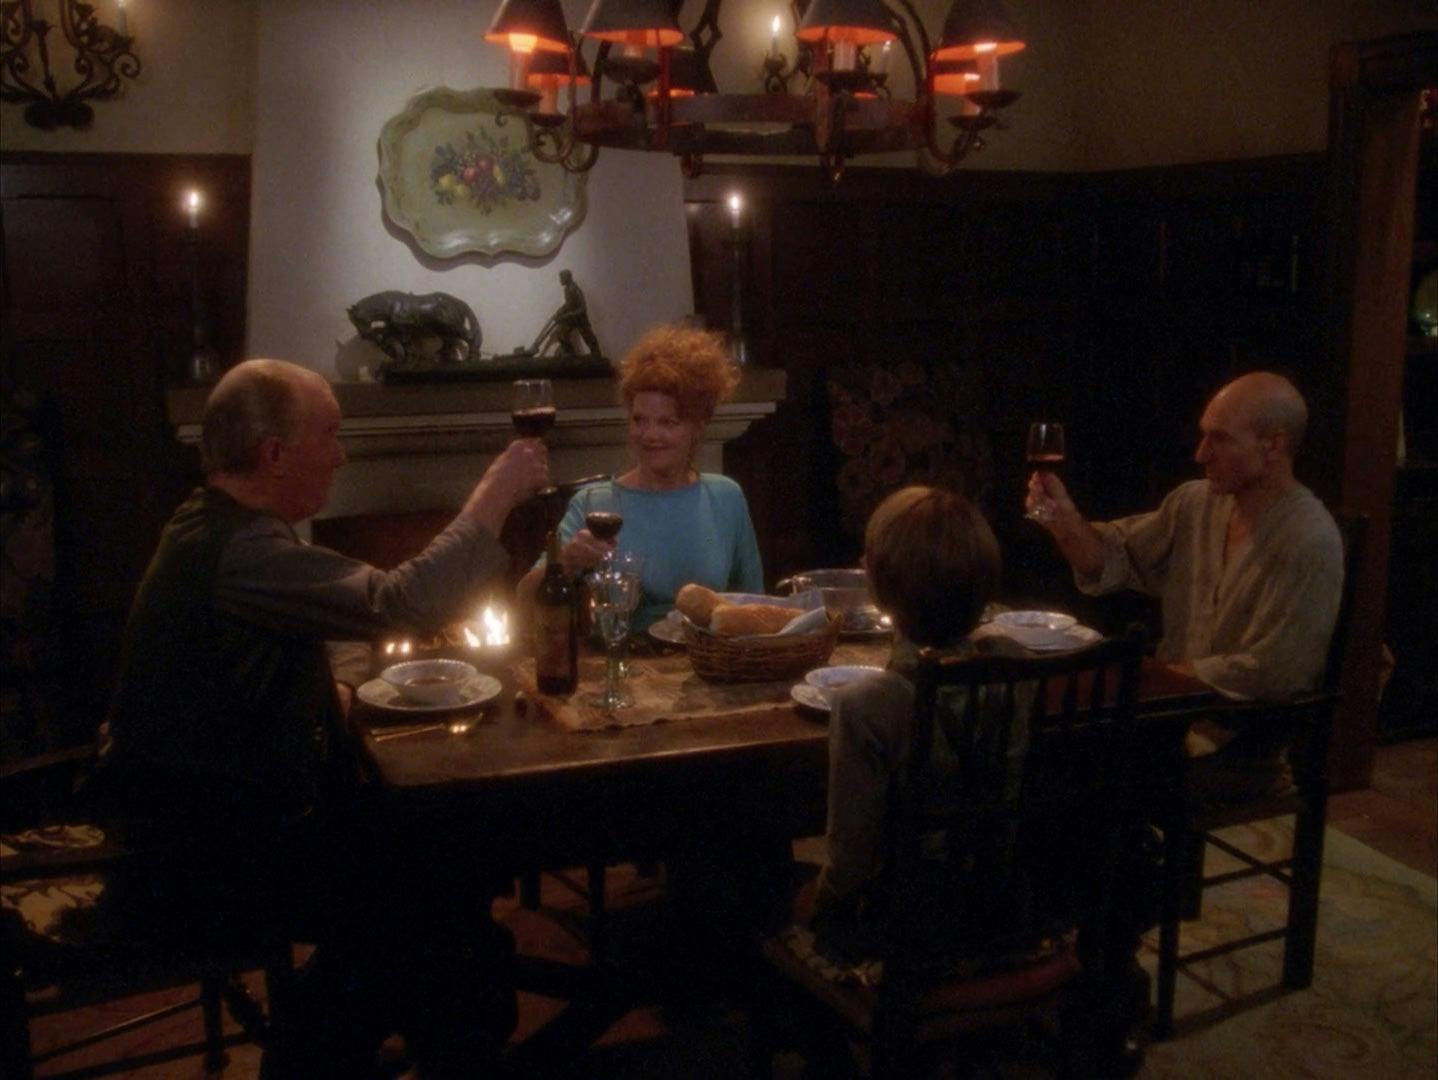 Jean-Luc returns to Chateau Picard and joins his brother and his family for dinner as they all raise their wine glasses in 'Family'